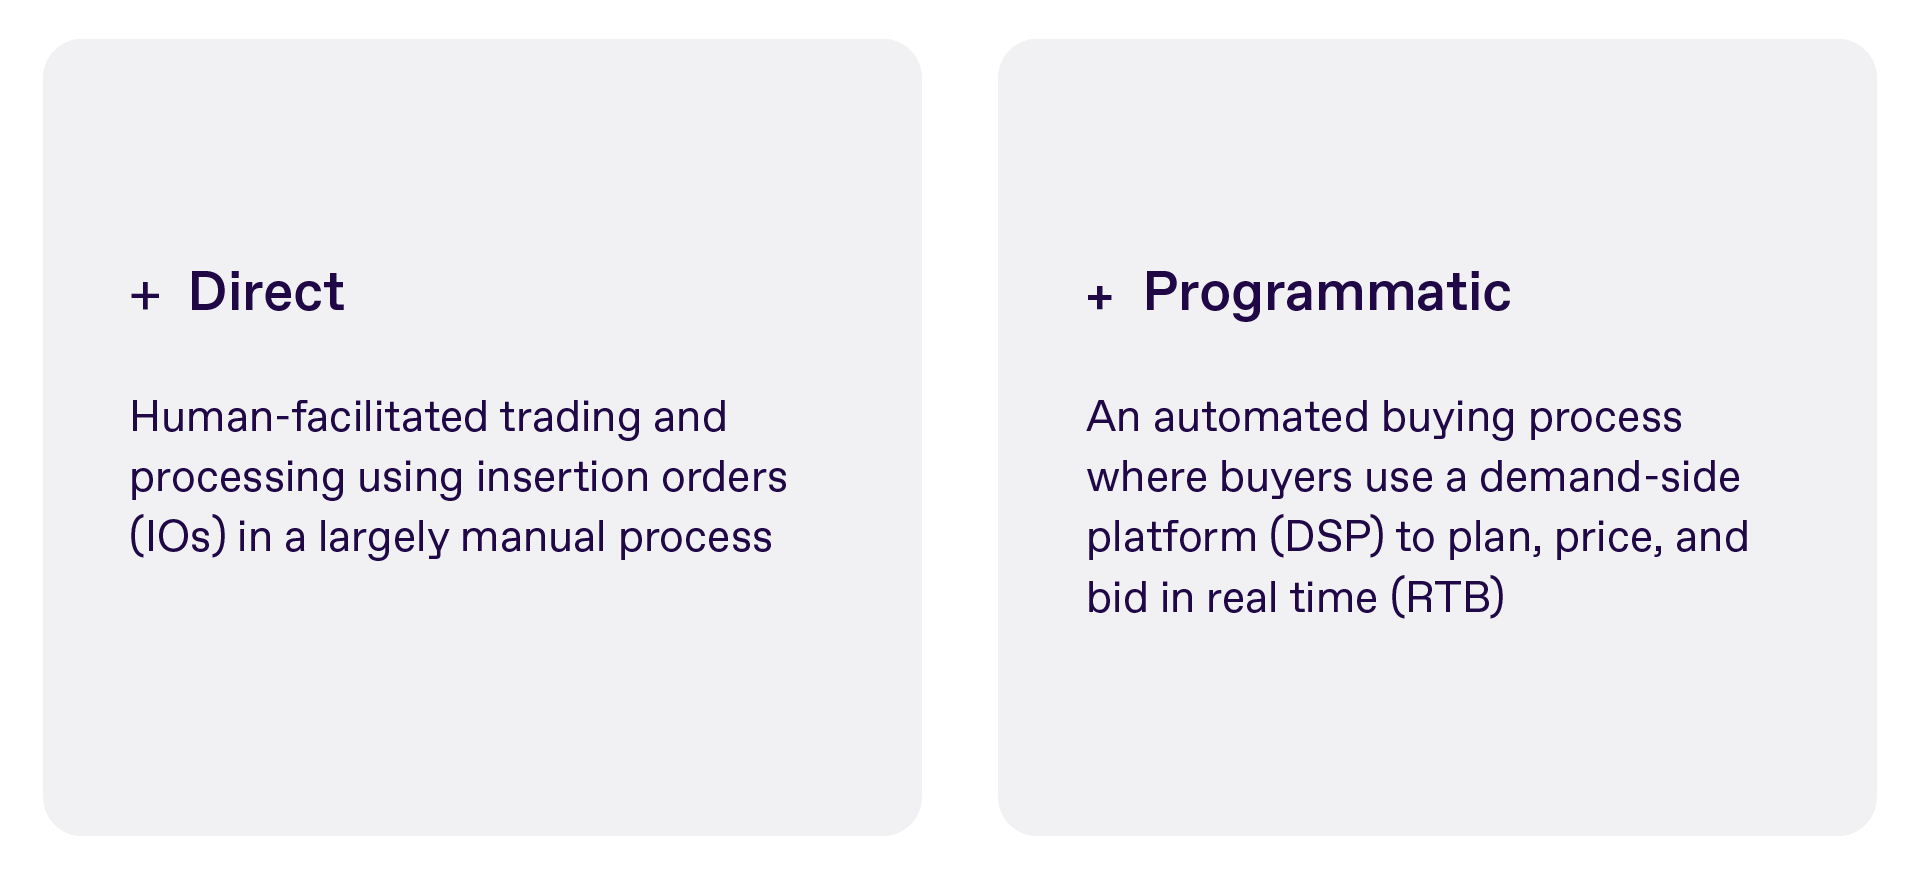 Graphic showing difference between direct and programmatic. Direct is human-facilitated trading and processing using insertion orders (IOs) in a largely manual process and programmatic is an automated buying process where buyers use a demand-side platform (DSP) to plan, price, and bid in real time (RTB) 